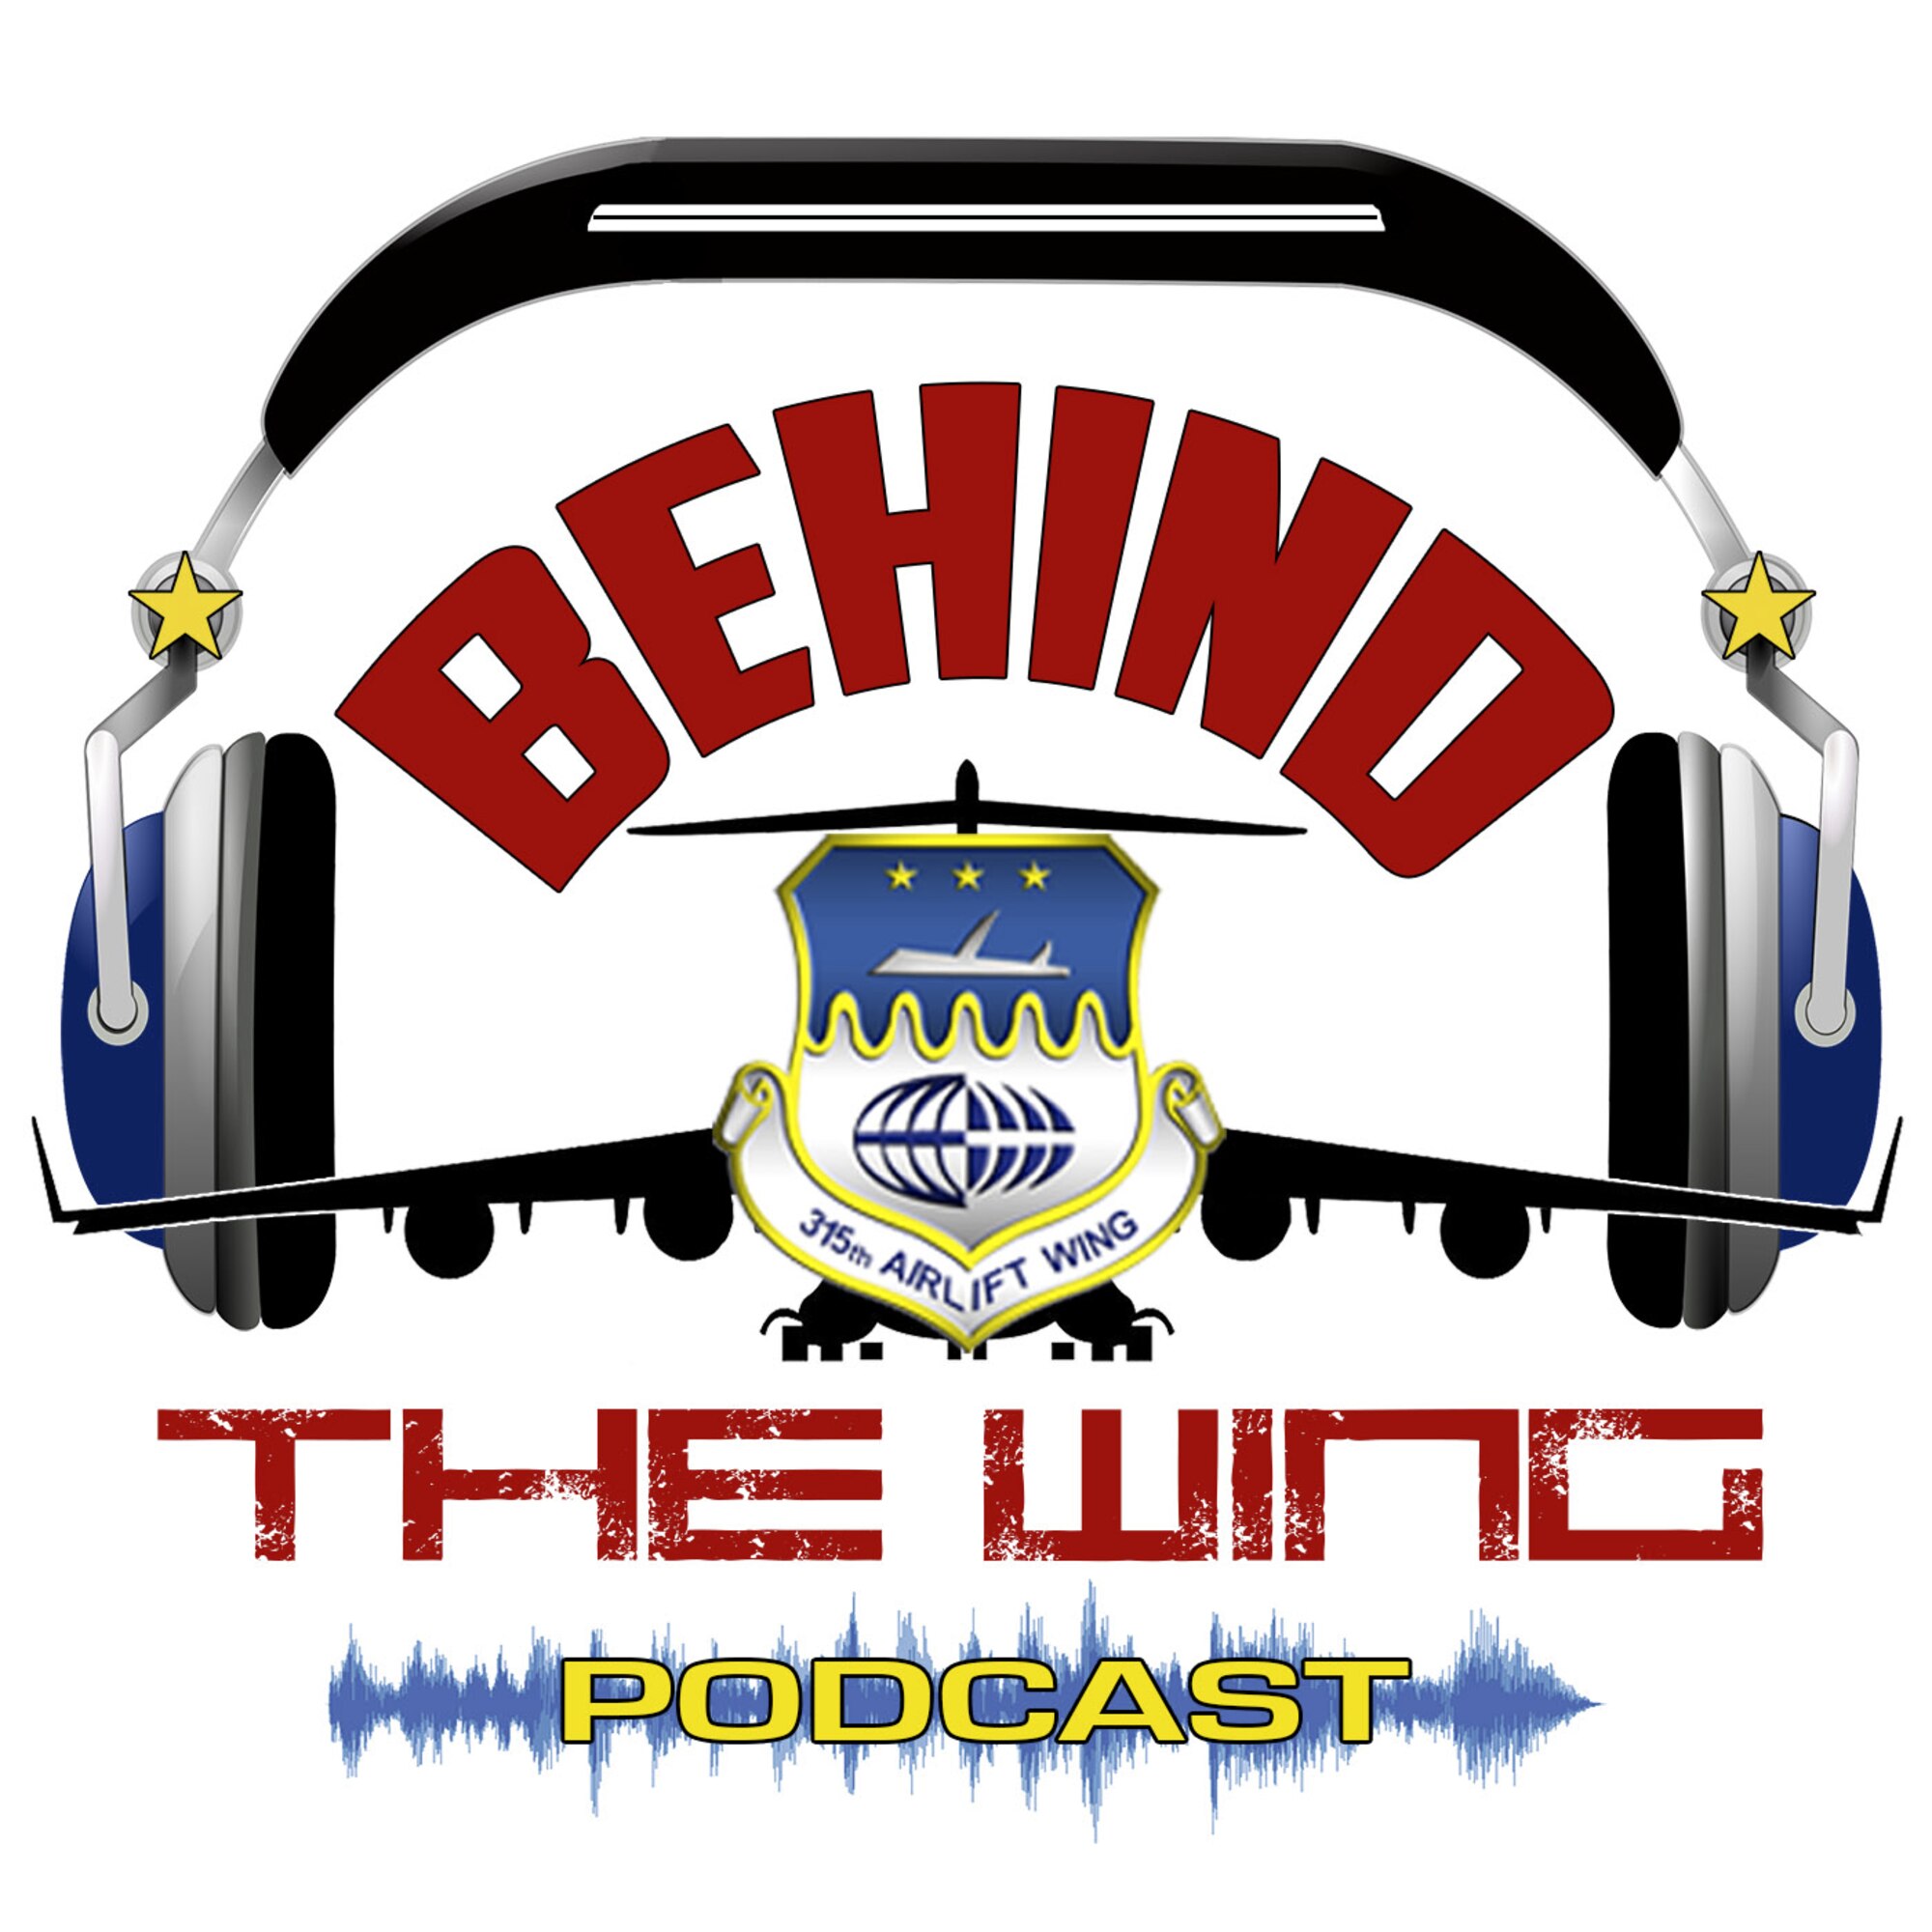 Behind the Wing Podcast logo